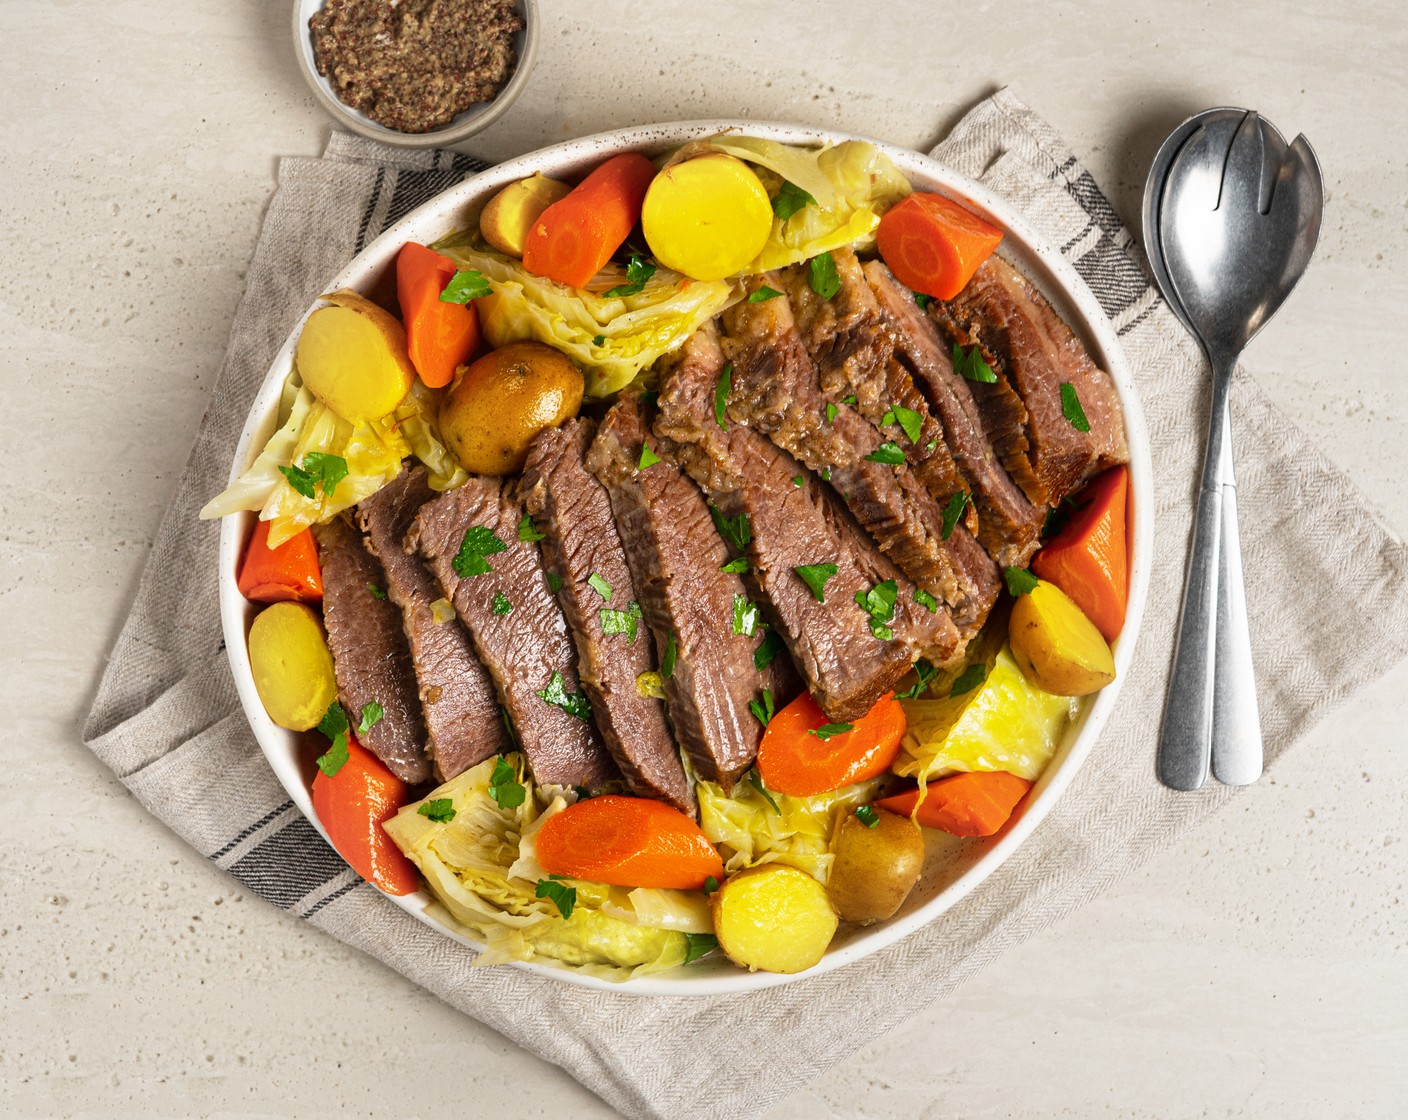 step 5 Transfer sliced beef with carrots, potatoes, and cabbage with broth to the serving plate. Garnish with Fresh Parsley (2 Tbsp) and serve with Whole Grain Mustard (2 Tbsp) on the side.